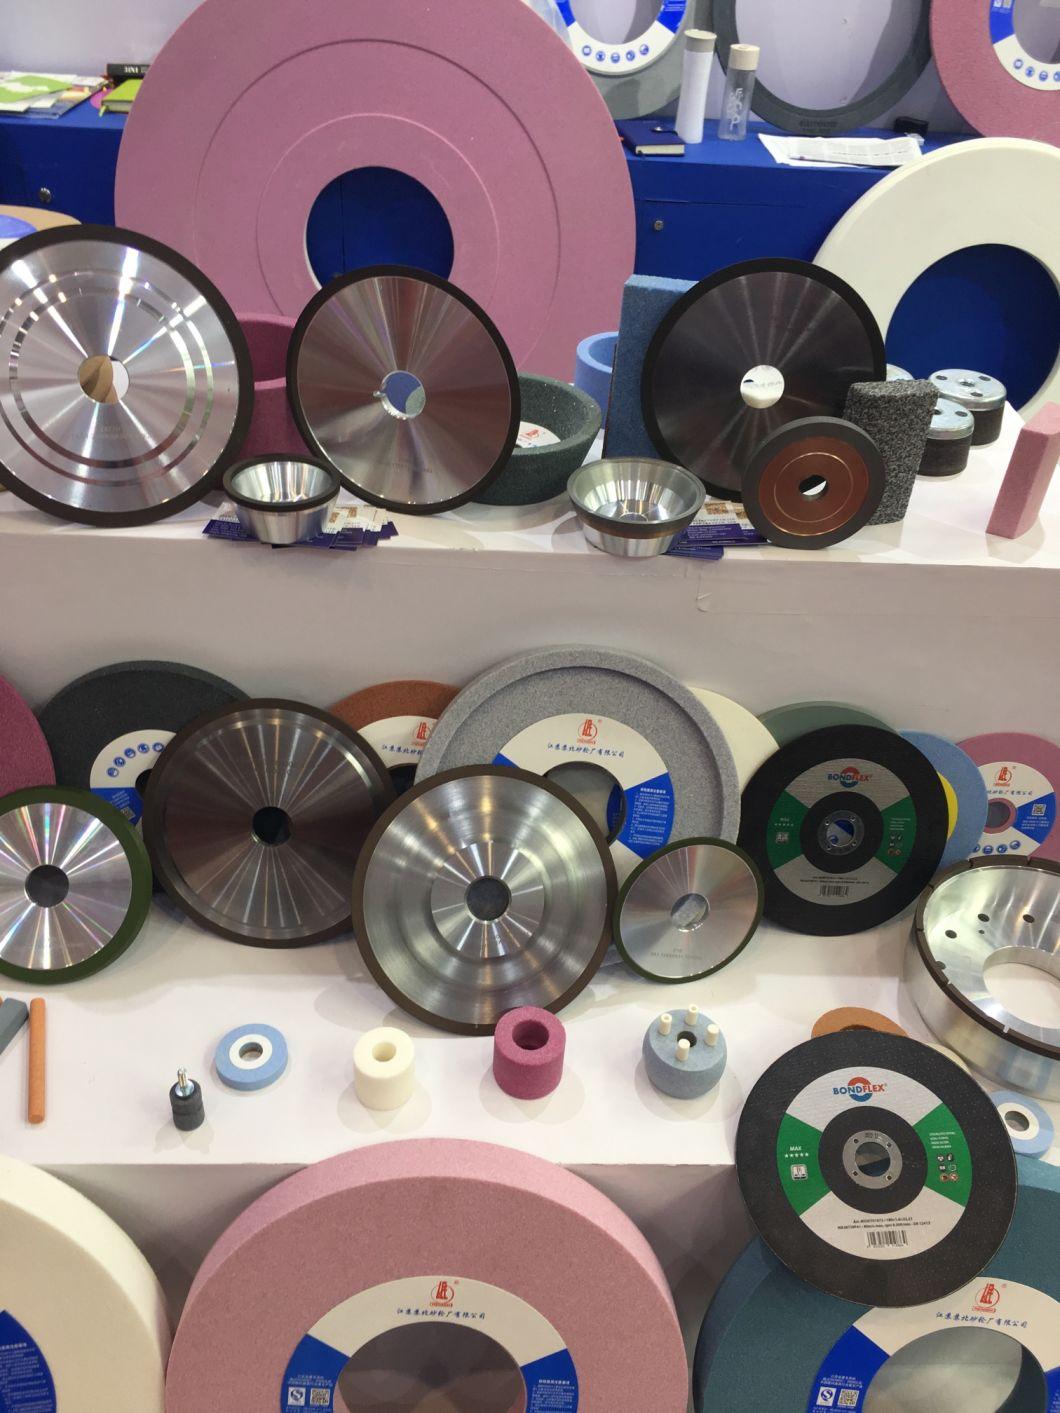 Centerless Grinding Wheels, Conventional Abrasives for Precision Grinding